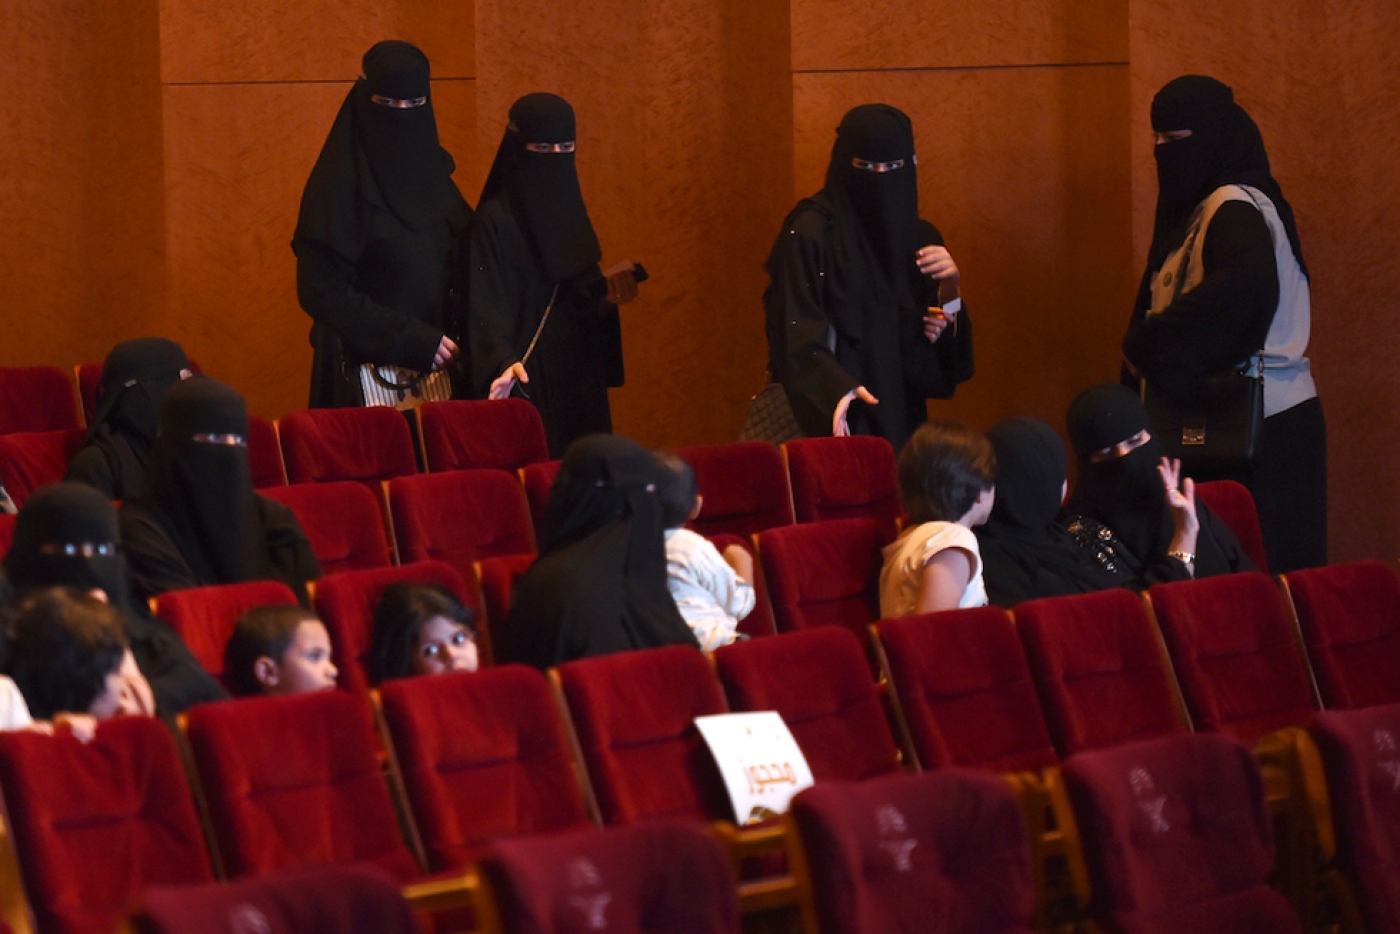 Saudi Arabia to allow first commercial cinemas in 35 years | Middle East Eye